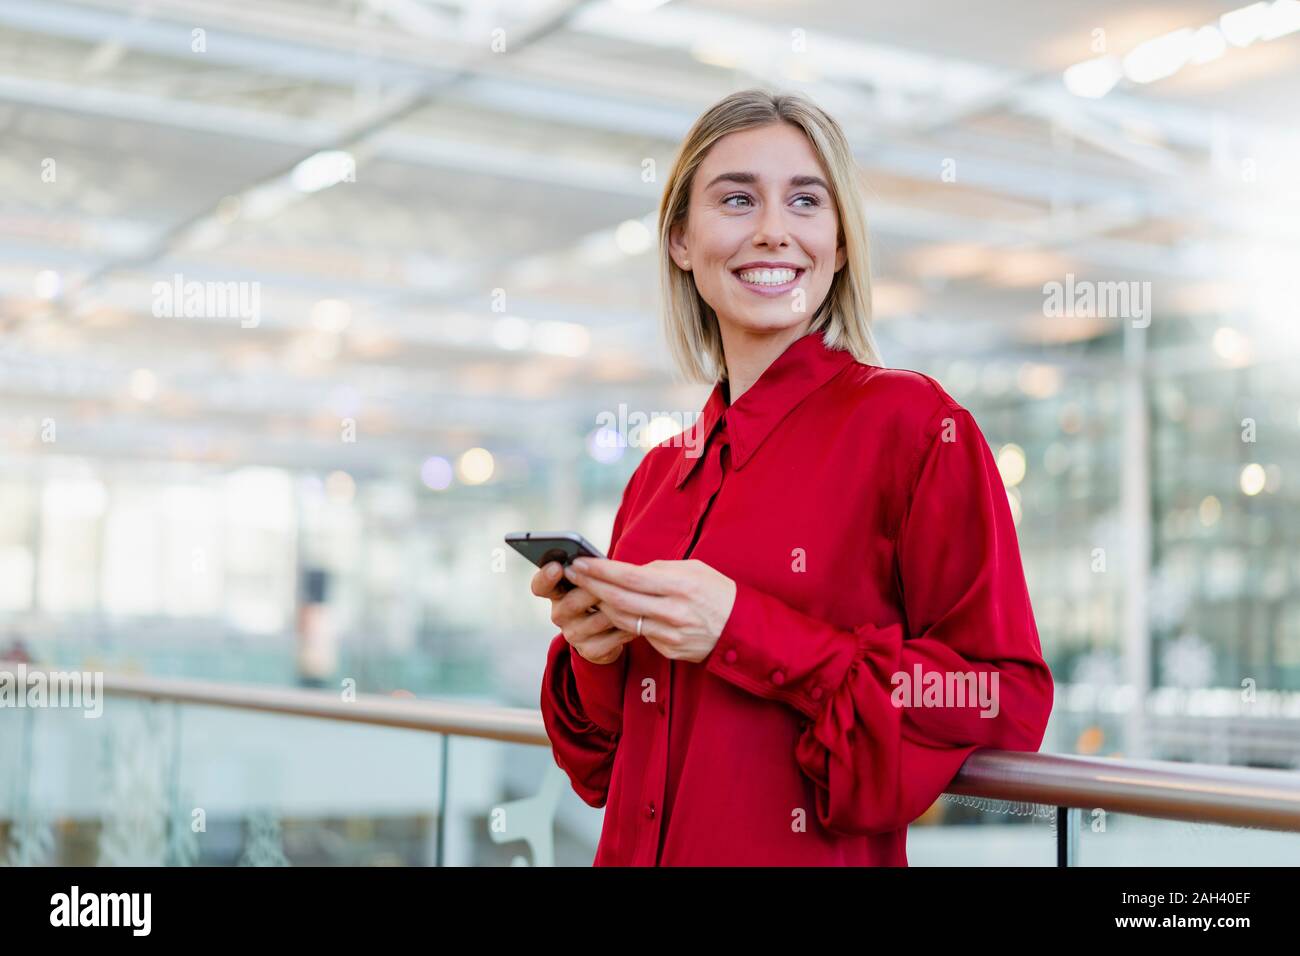 Smiling young businesswoman standing at a railing with cell phone Stock Photo